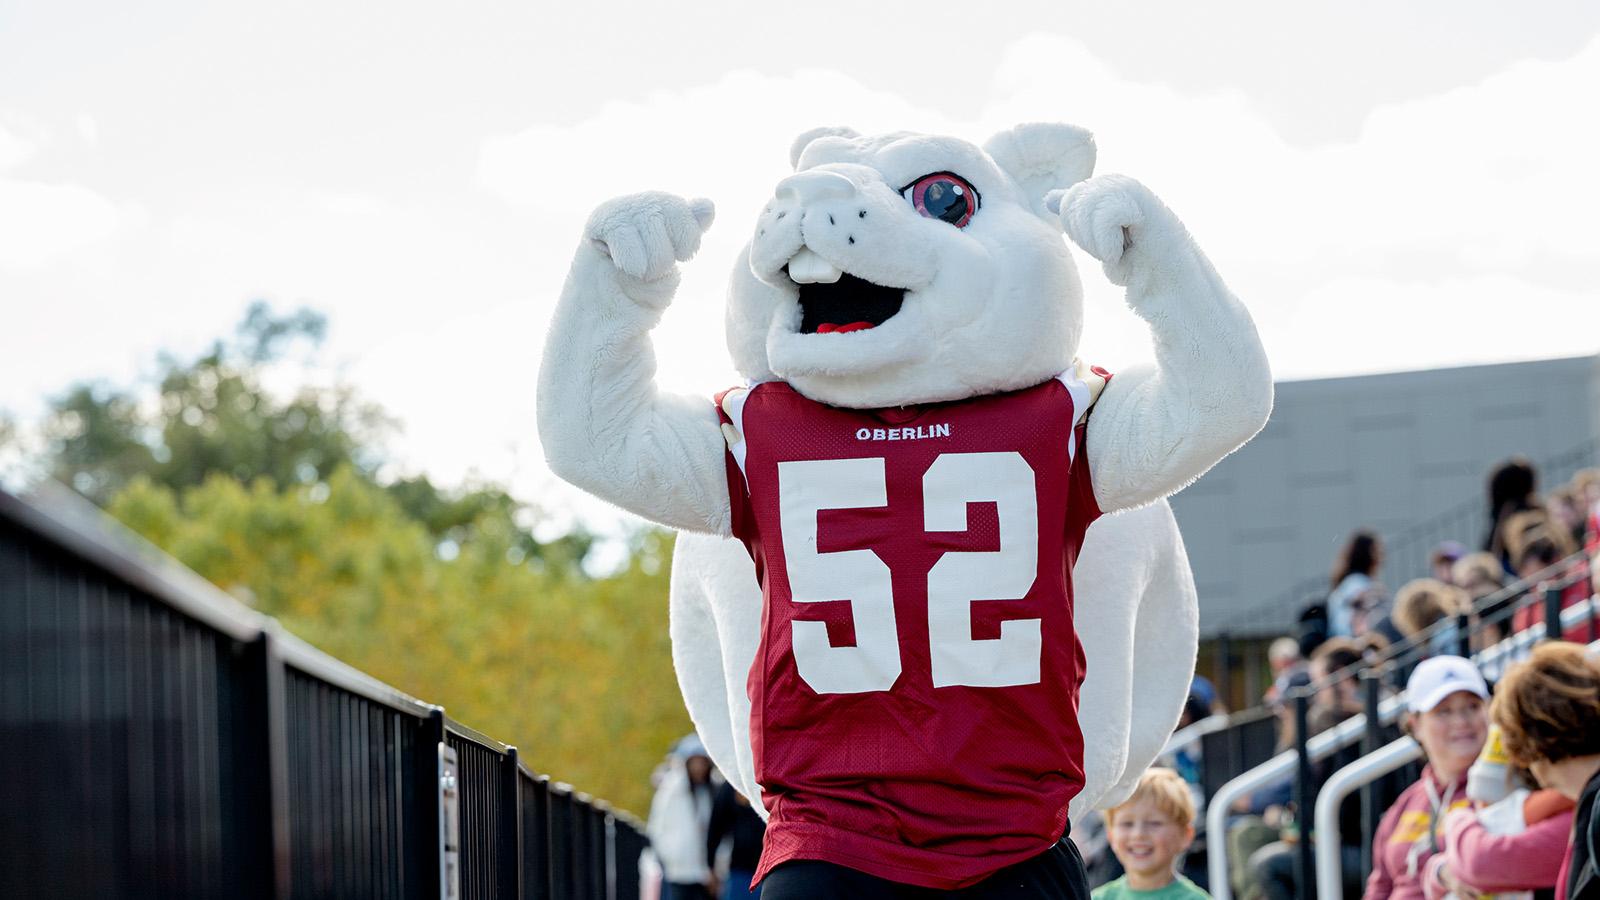 A white squirrel mascot wearing number 52 cheers at the sideline.